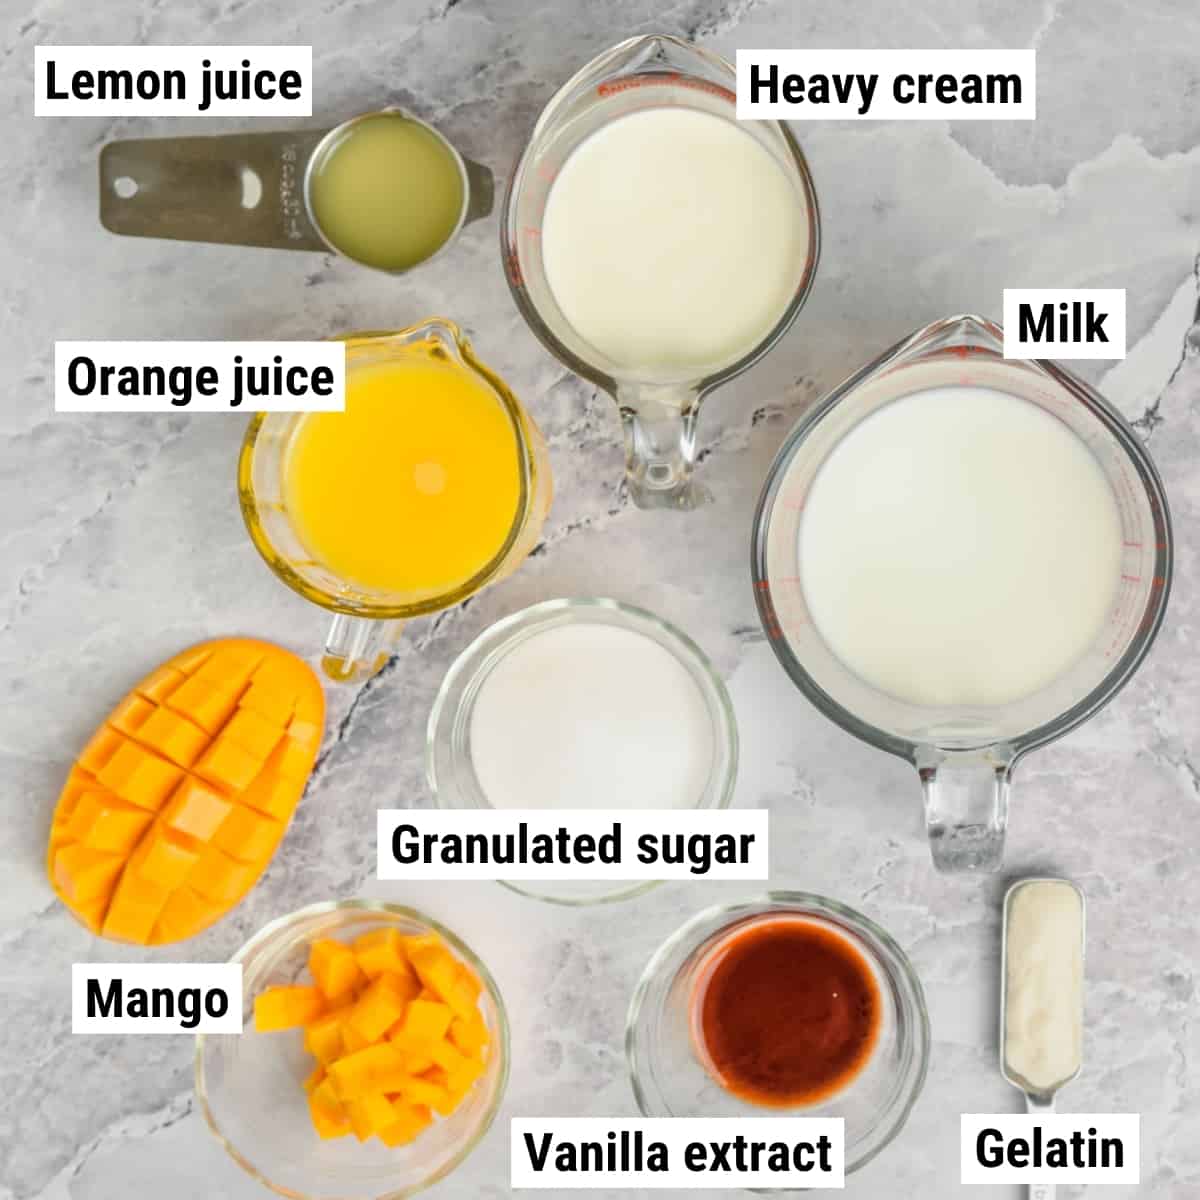 The ingredients to make mango panna cotta laid out on a table.